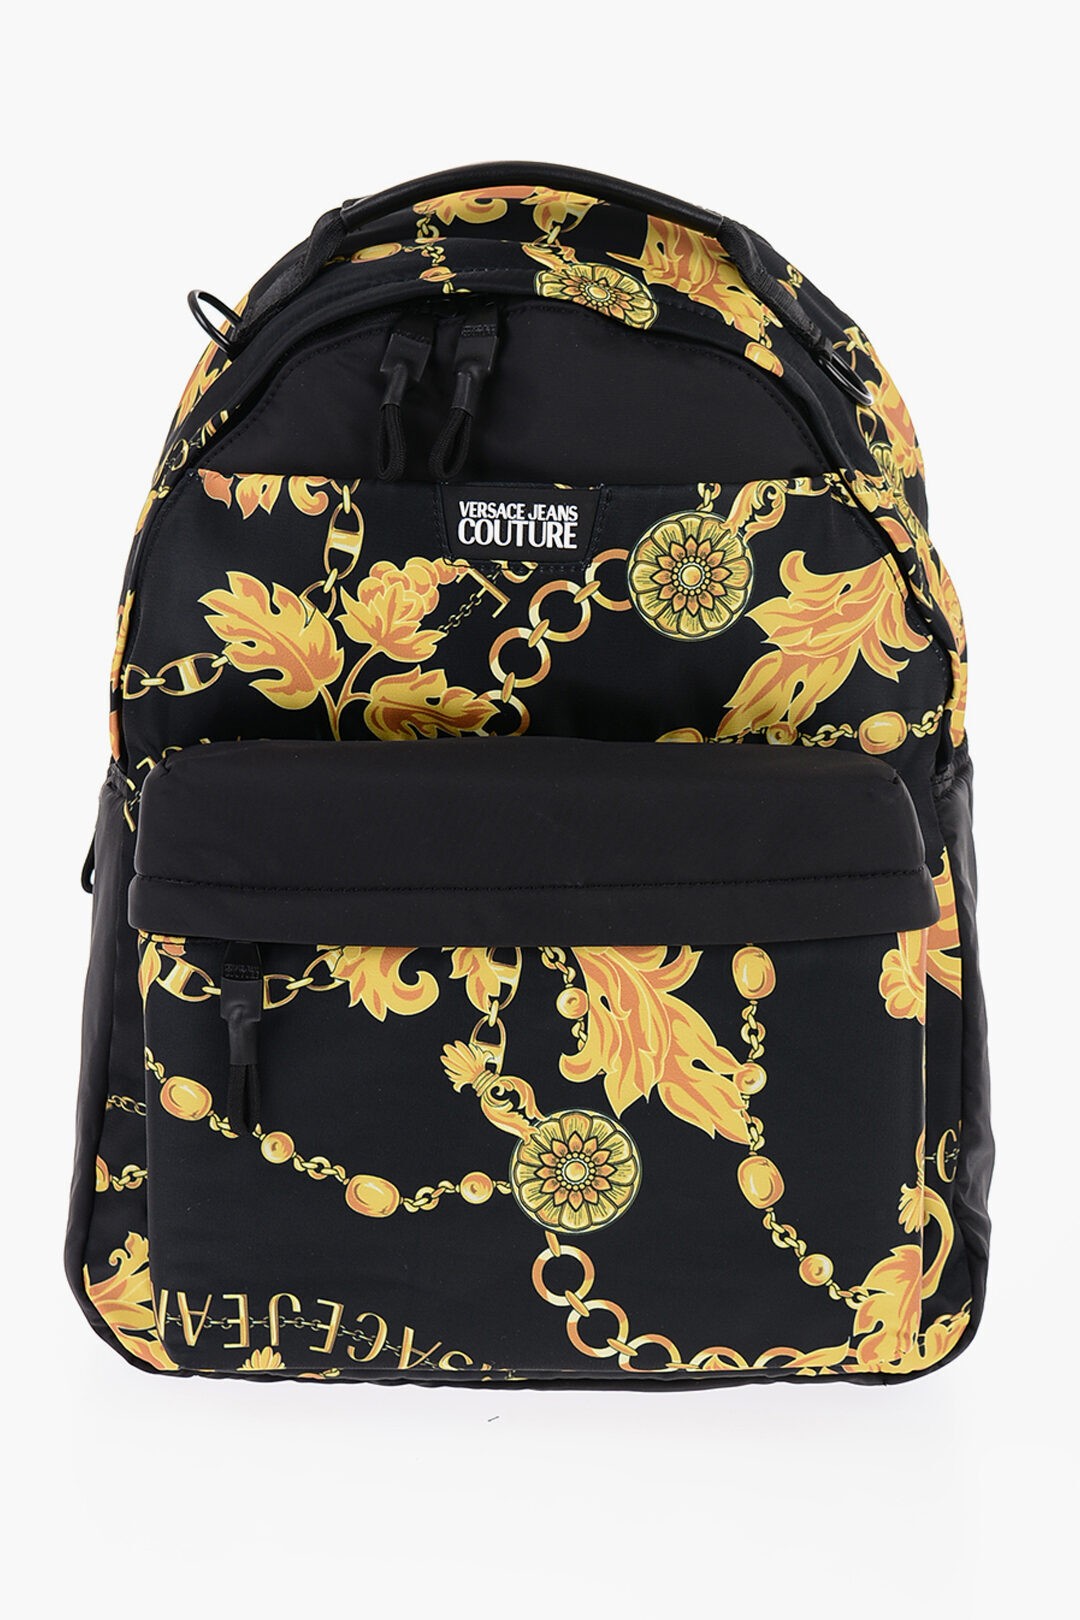  VERSACE ヴェルサーチ バックパック 75YA4B80 ZS930 G89 メンズ JEANS COUTURE BAROQUE PRINTED RANGE ICONIC BACKPACK WITH MAX  dk